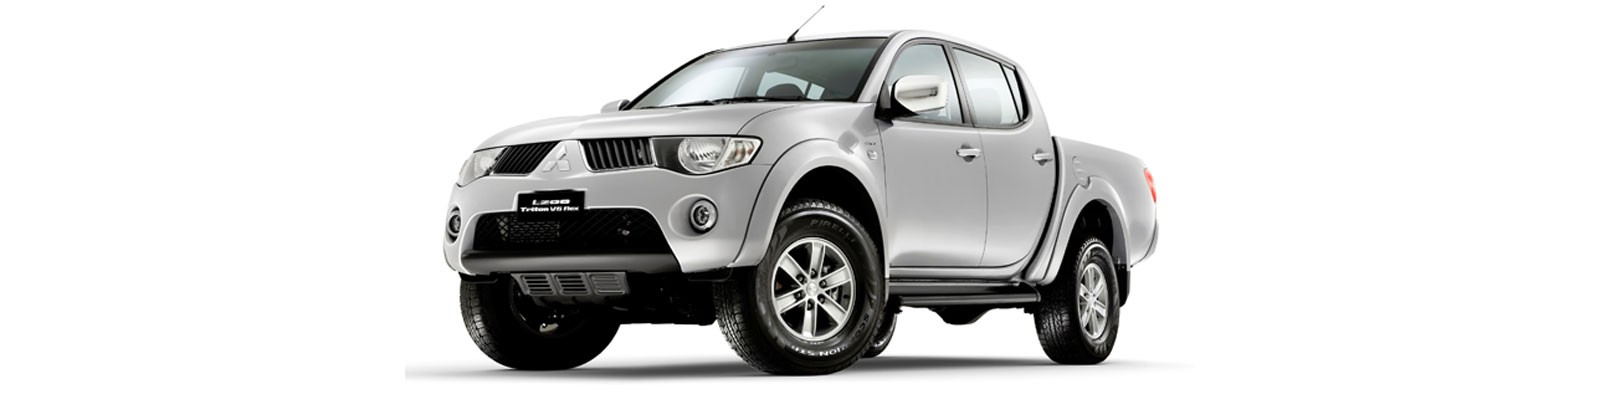 Accessories For Mitsubishi L200 Long Bed Double Cab 2010 To 2015